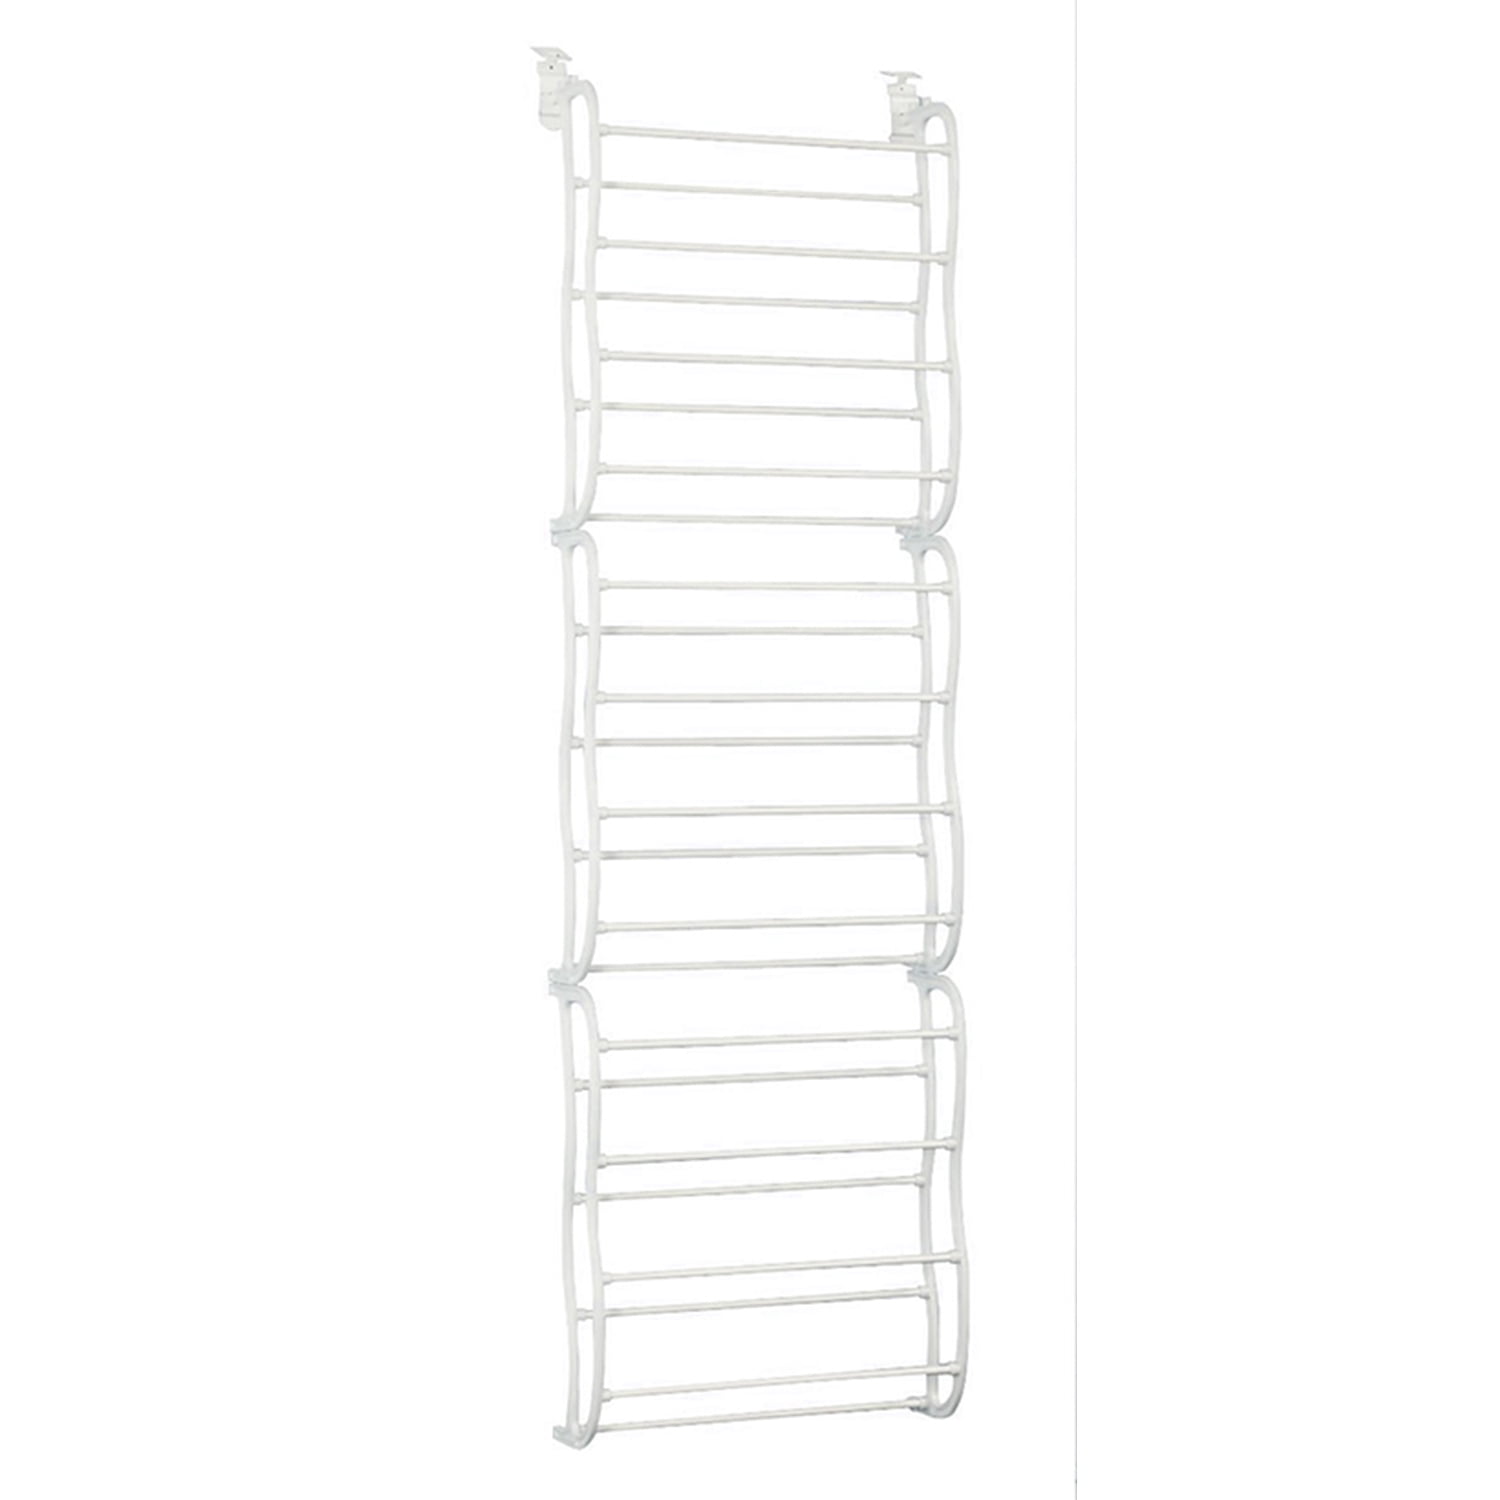 DSA Trade Shop Over-The-Door Shoe Rack 36 Pairs forWall Hanging Closet Organizer Storage Stand